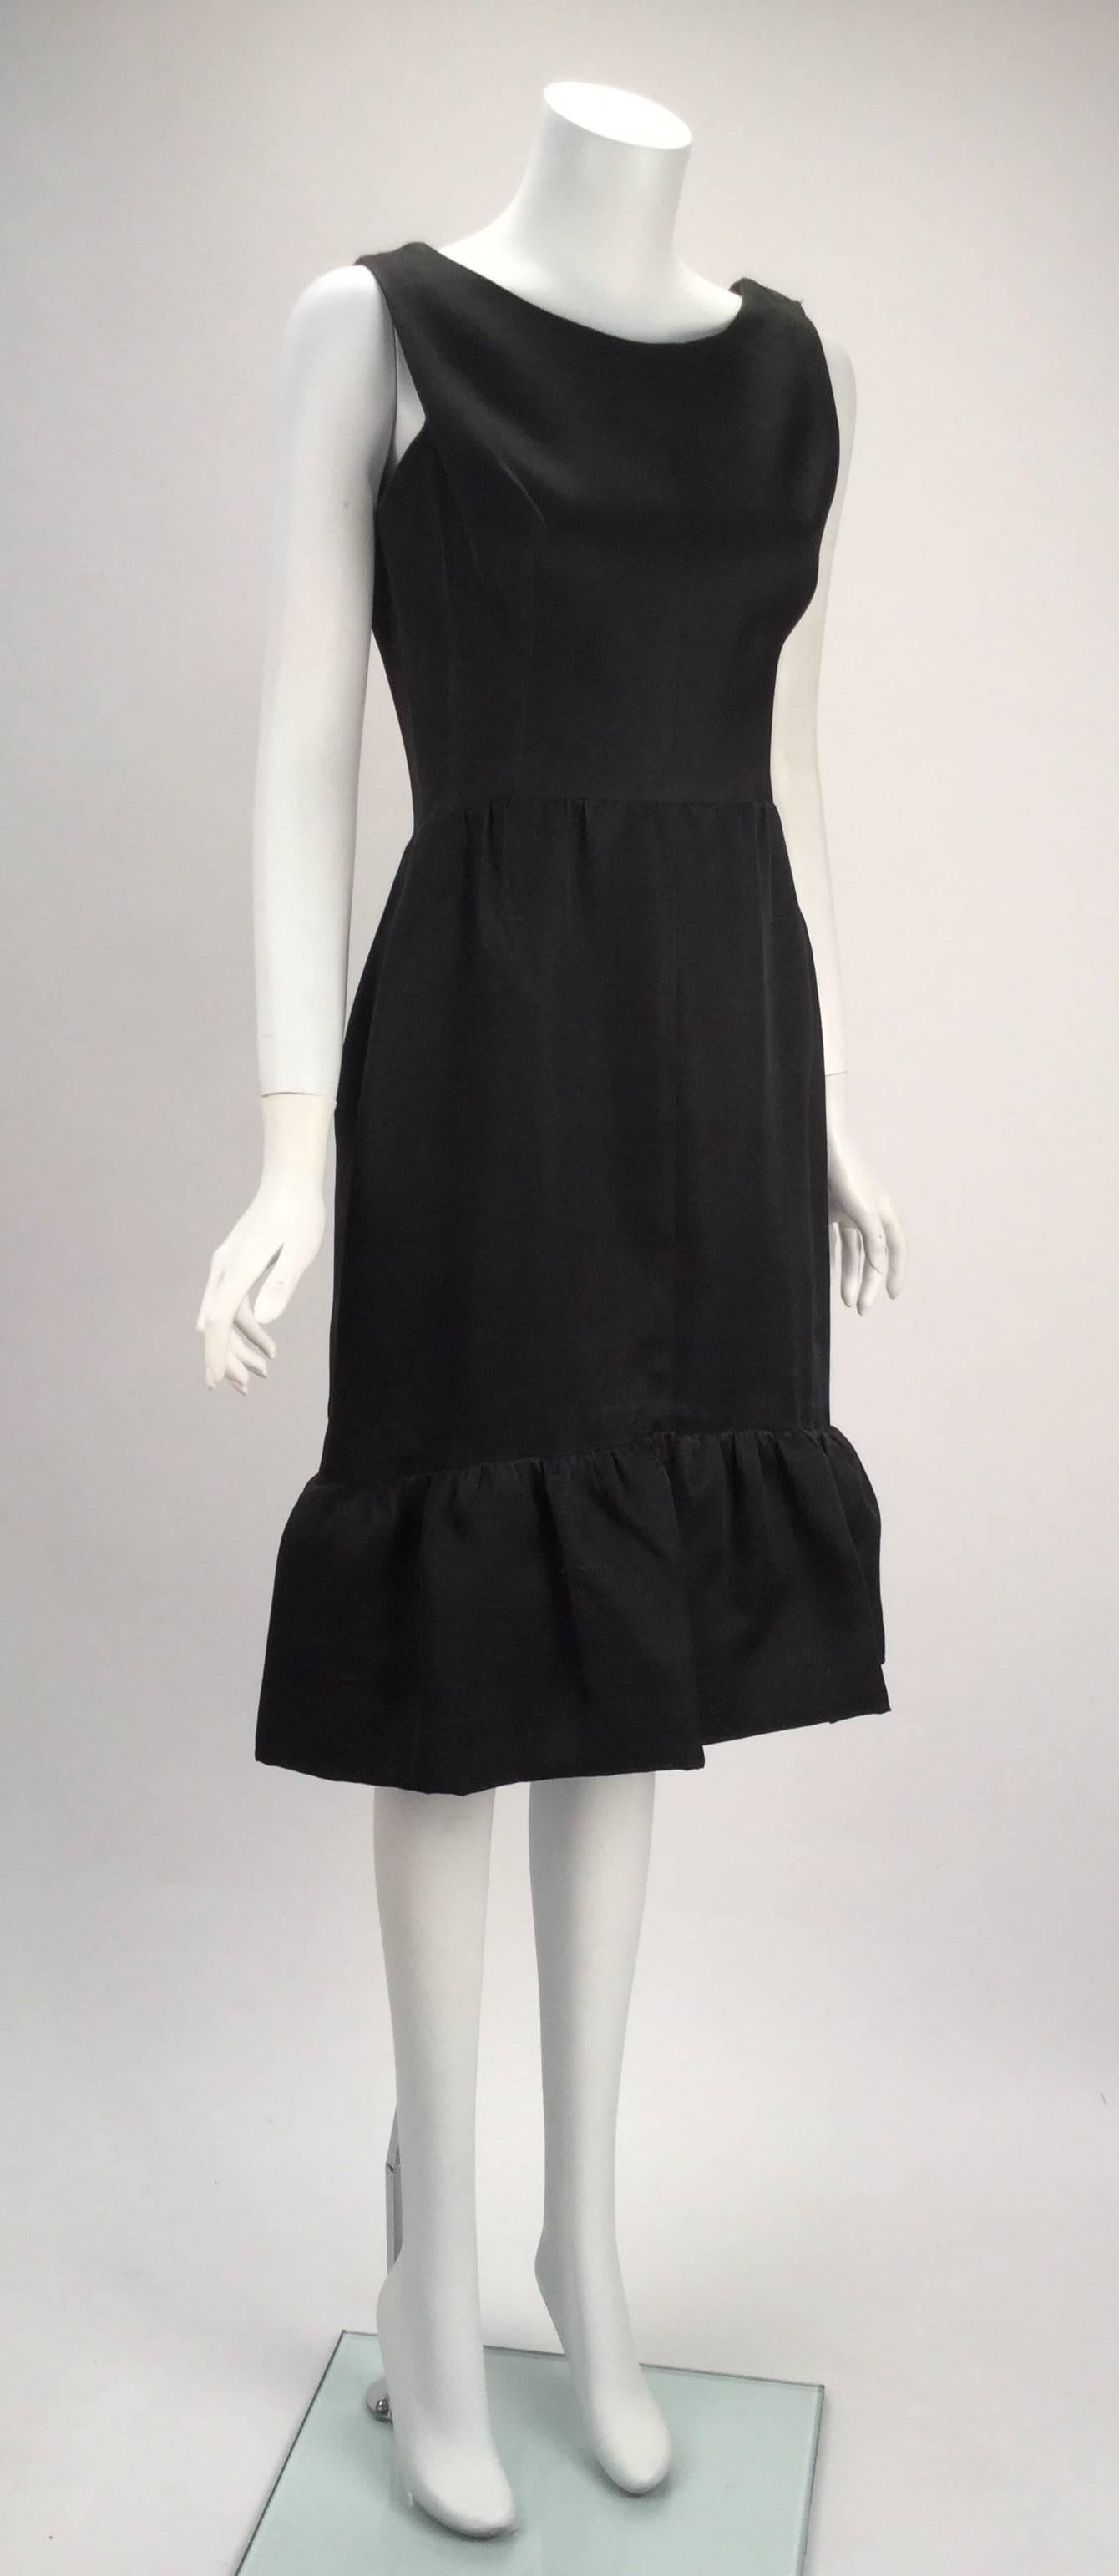 1960s Balenciaga black silk couture cocktail dress. Sleeveless with large ruffle hem. The dress fastens with a side zipper and hook-n-eye/ snap closure. One of the straps also fastens with hook-n-eyes.  

Modern Size 6

*All garments and